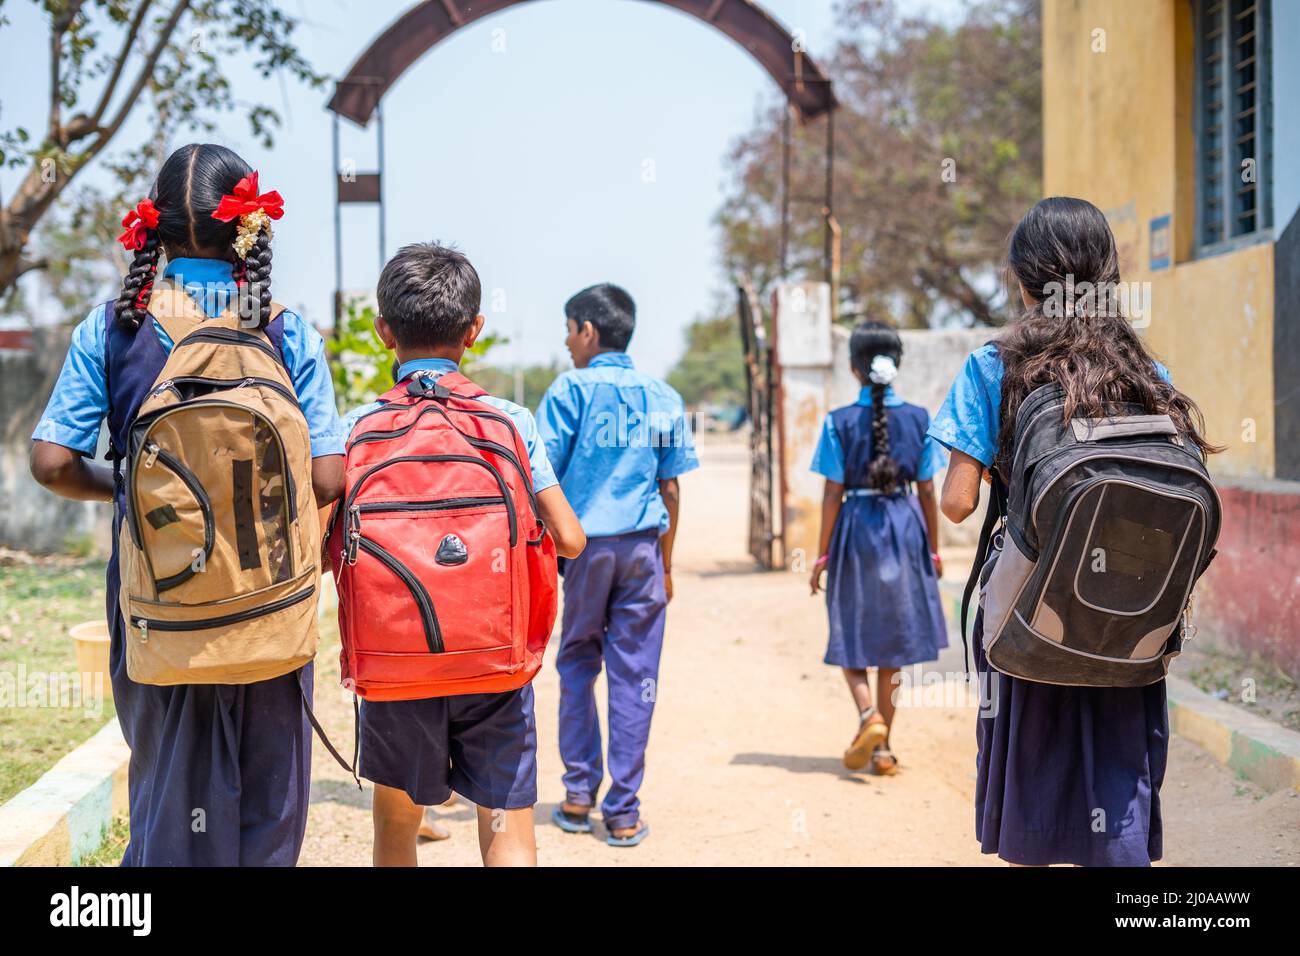 Back view shot of group of teenager kids in unifrom going home from school after classes - concept of education, learning and childhood growth Stock Photo